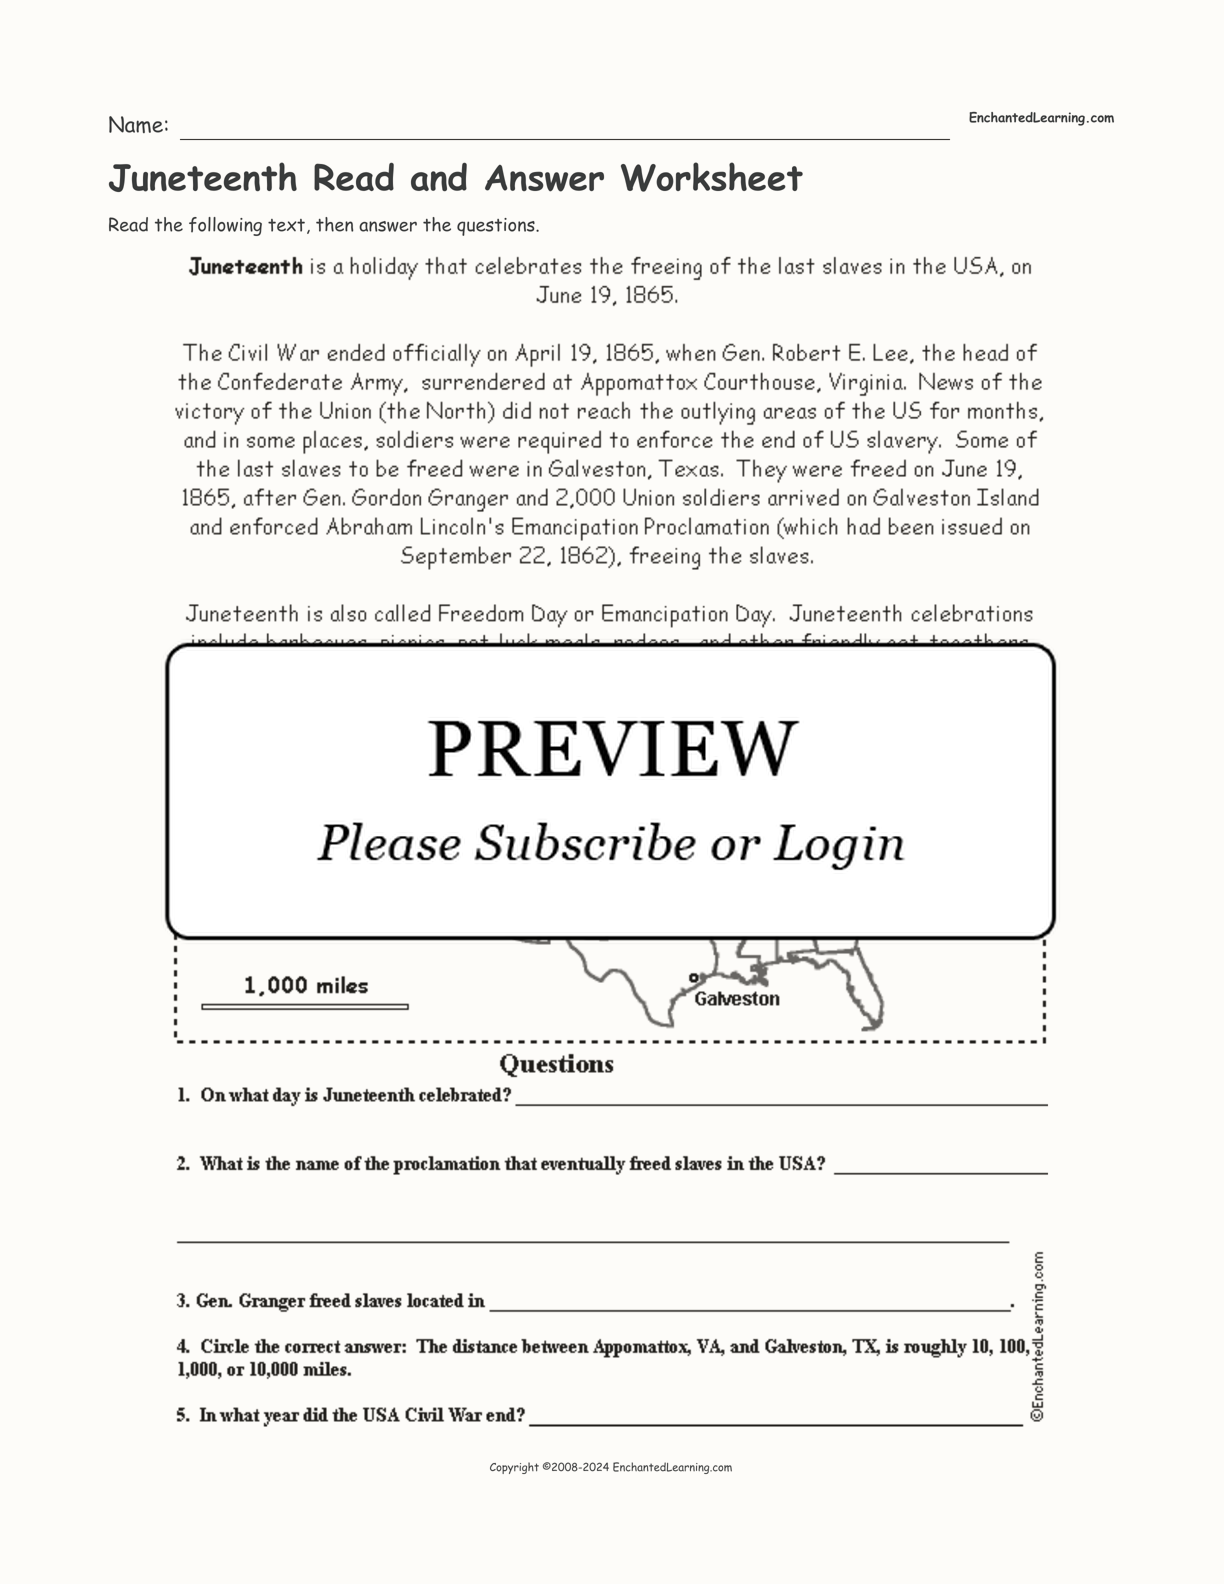 juneteenth read and answer worksheet enchanted learning